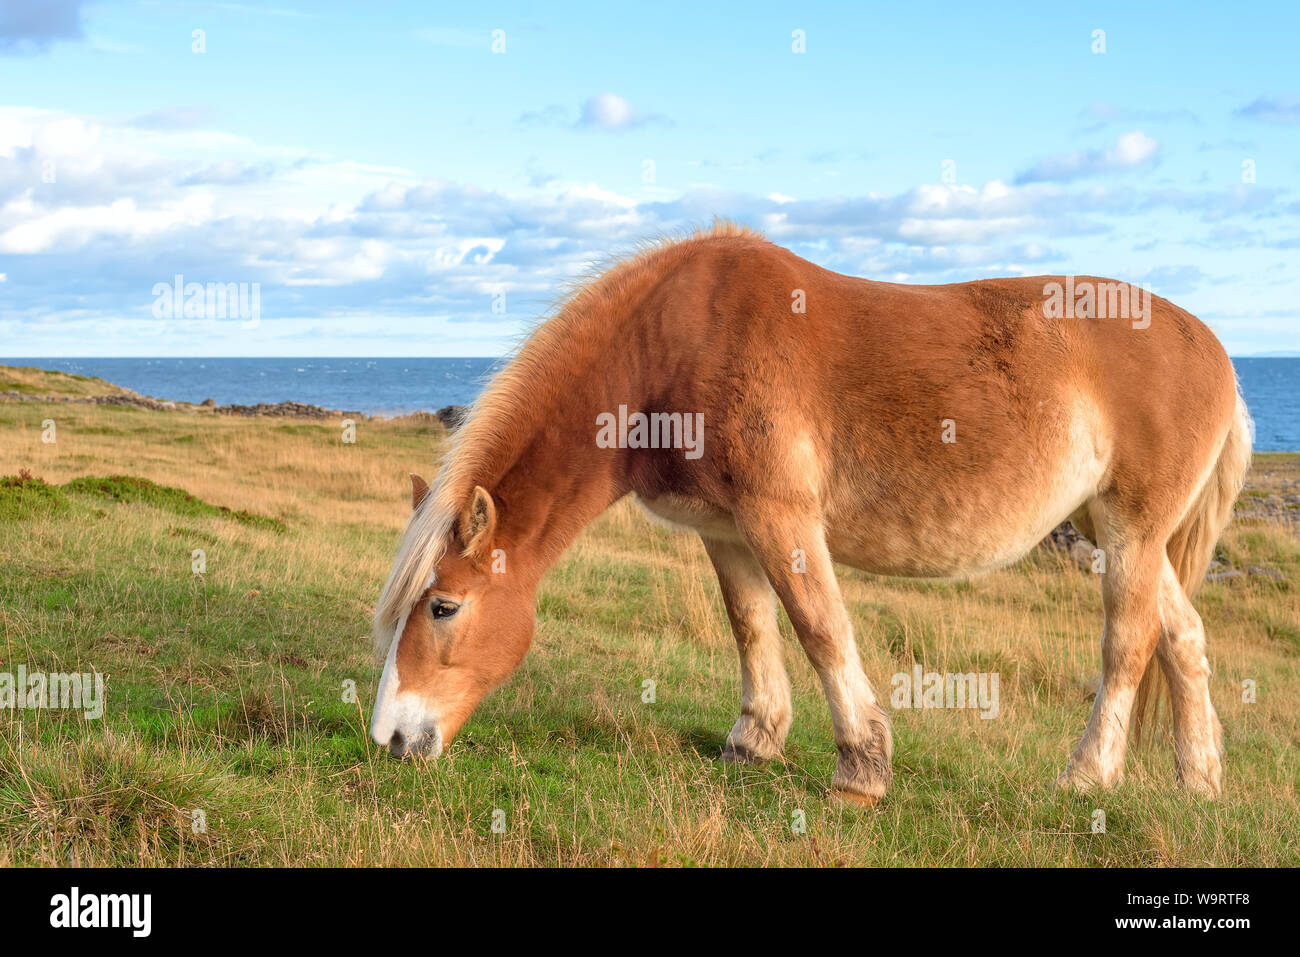 The red rural horse who is grazed on the seashore Stock Photo